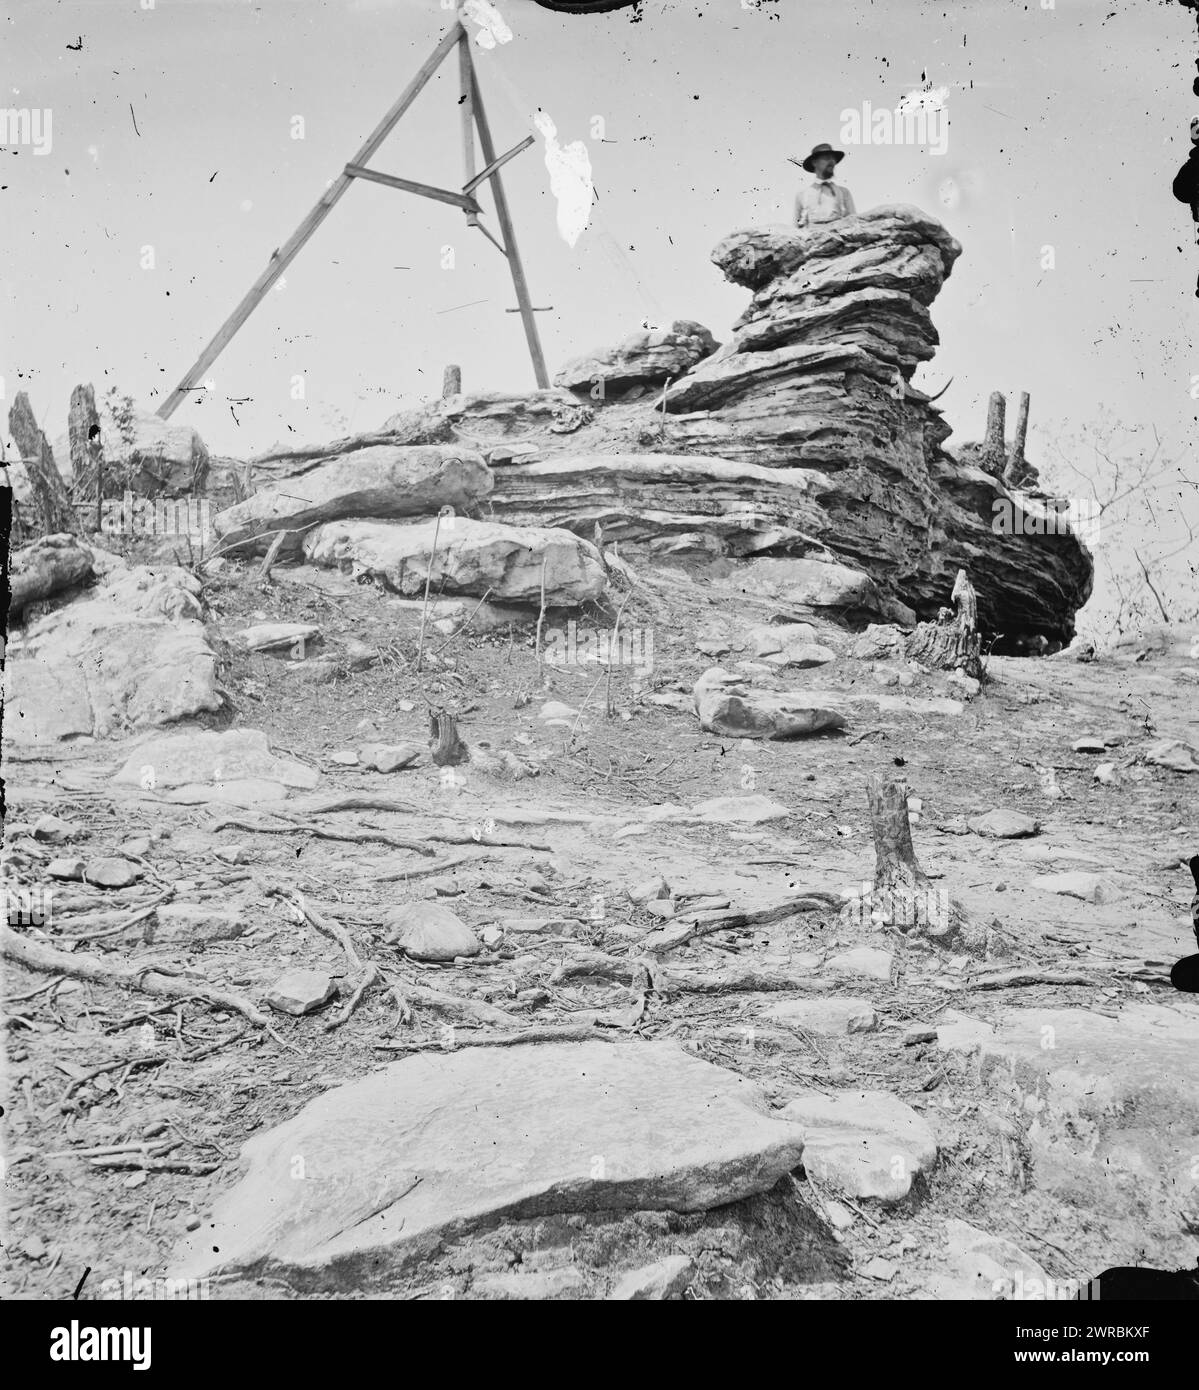 Chattanooga, Tenn., vicinity. Tripod signal erected by Capts. Dorr and Donn of U.S. Coast Survey at Pulpit Rock on Lookout Mountain, Photograph of the War in the West. These photographs are of the Battle of Chattanooga, September-November 1863. After Rosecrans' debacle at Chickamauga, September 19-20, 1863, Bragg's army occupied the mountains that ring about the vital railroad center of Chattanooga. Grant, brought in to save the situation, steadily built up offensive strength, and on November 23-25, burst the blockade in a series of brilliantly executed attacks. The photographs Stock Photo